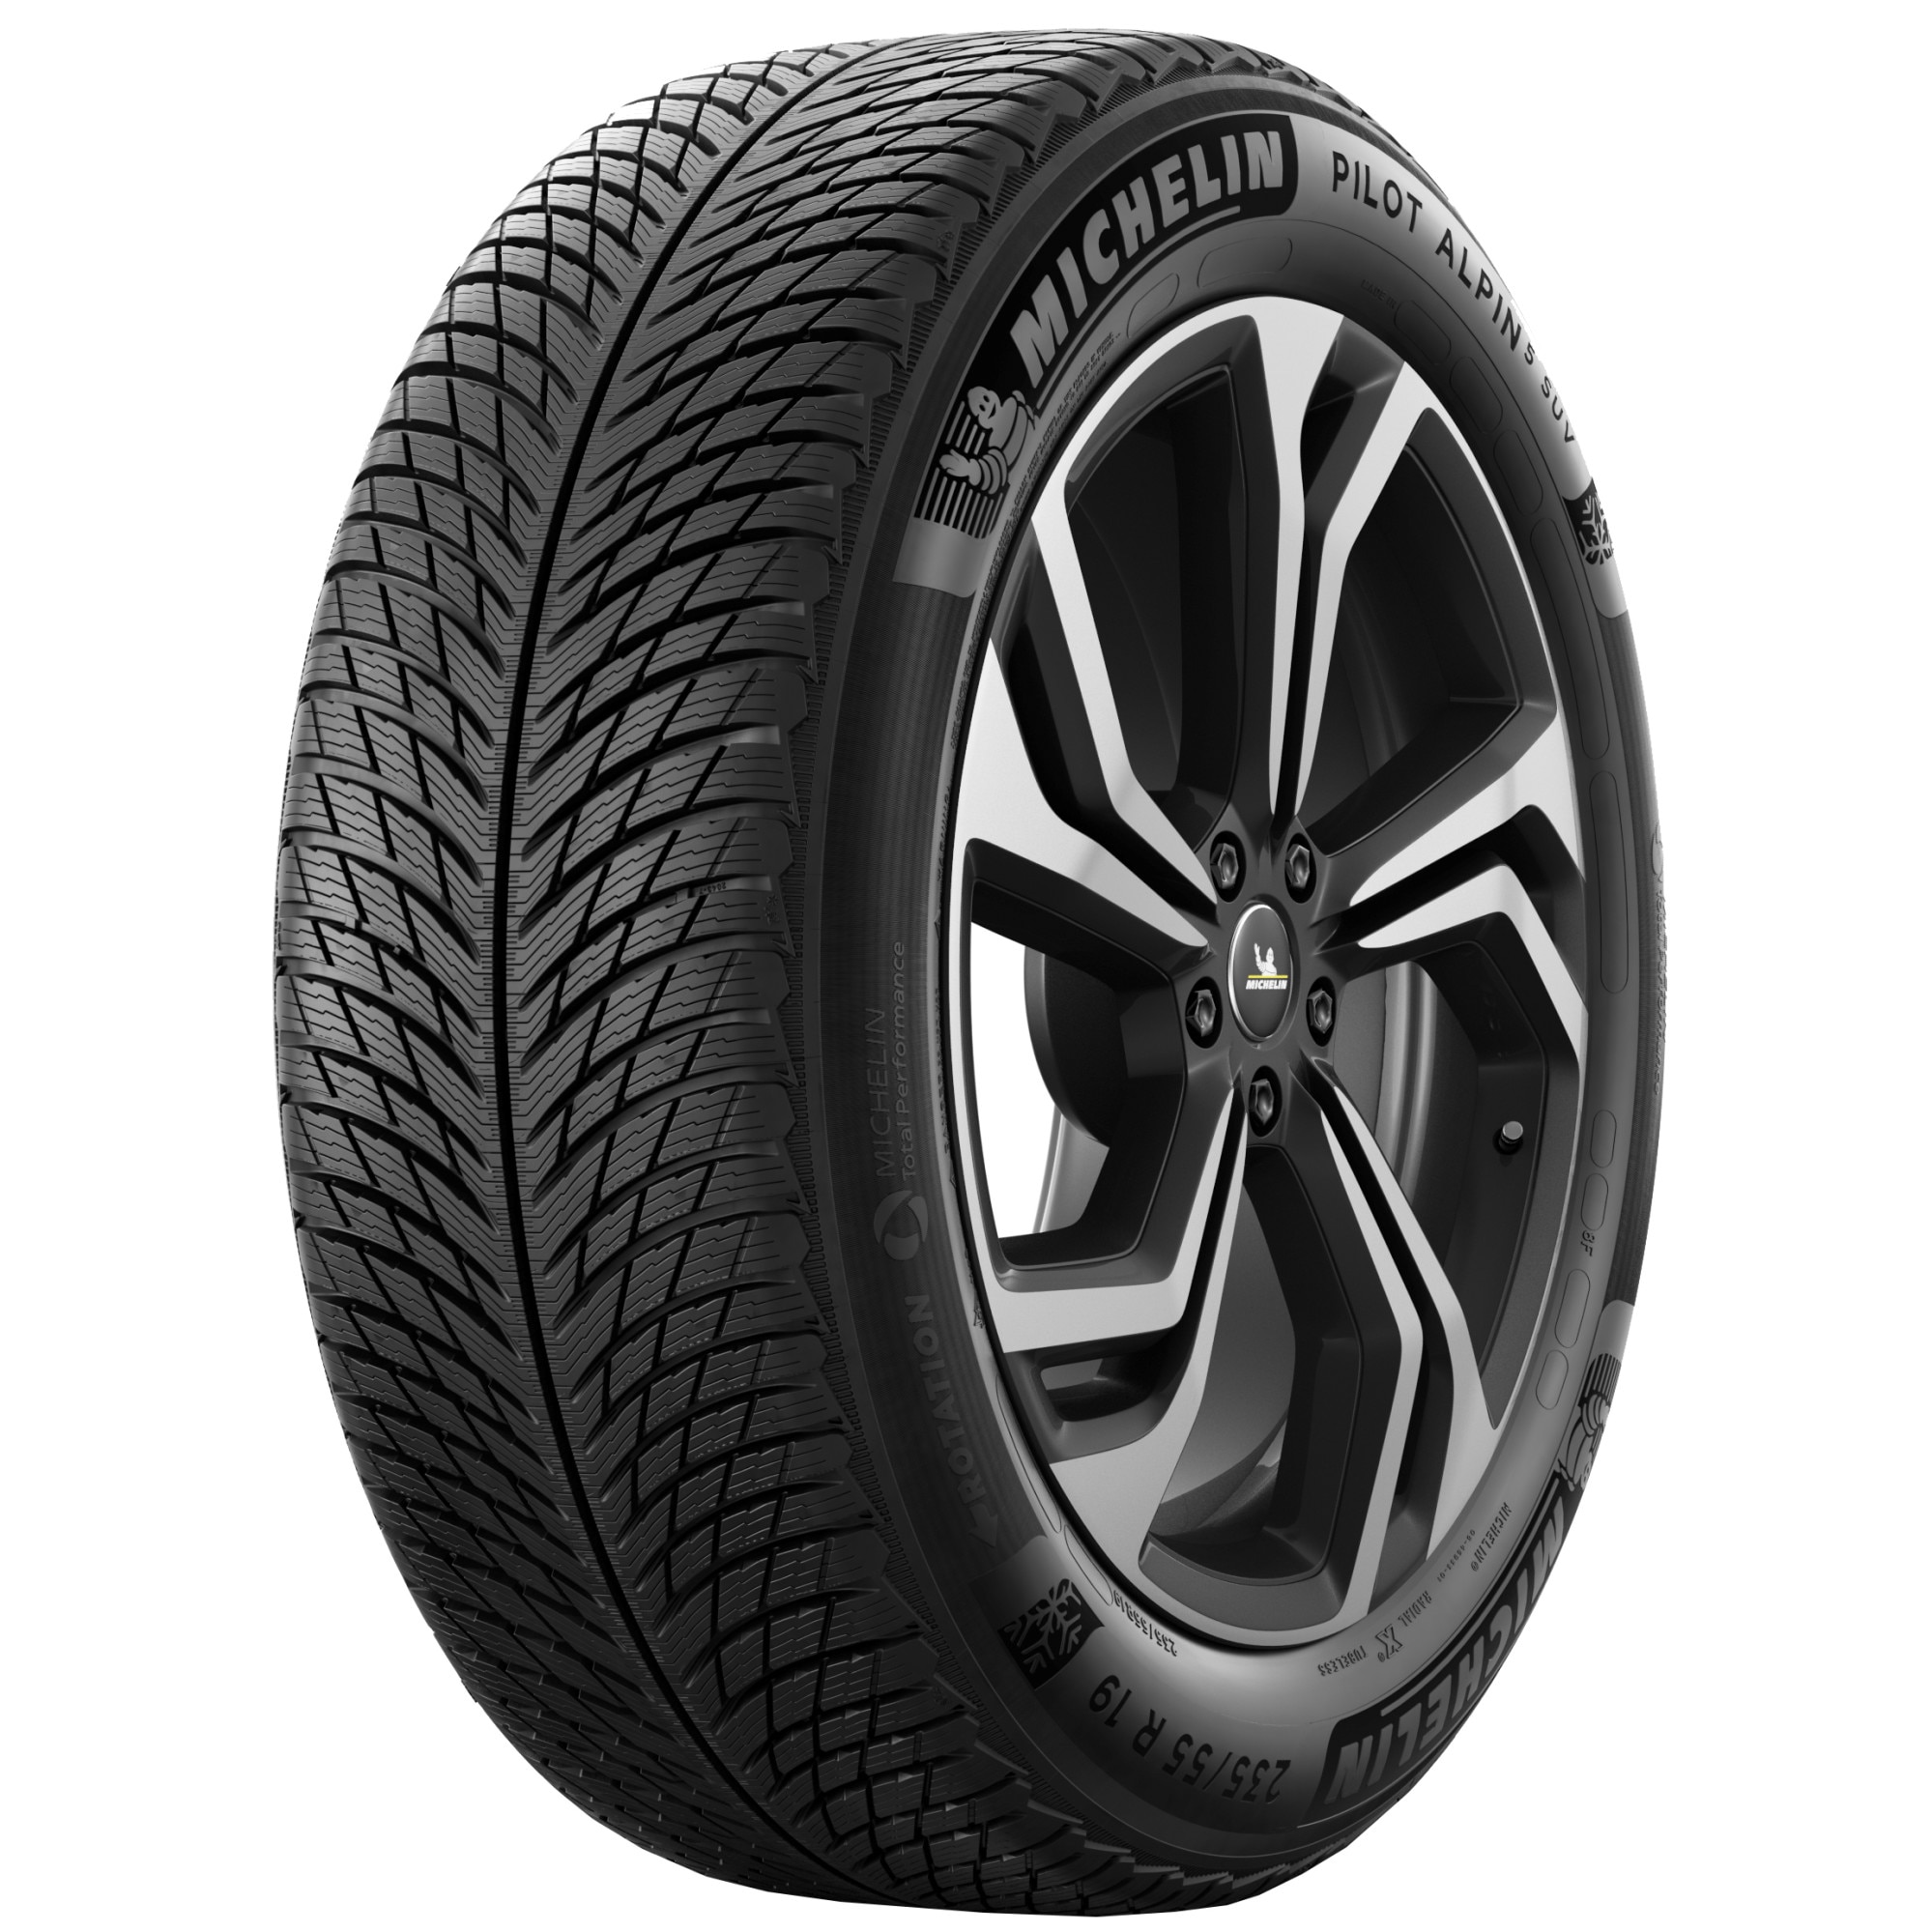 Amorous witch Anthology Anvelopa de iarna Michelin PILOT ALPIN 5 SUV 255/55R18 109V - eMAG.ro